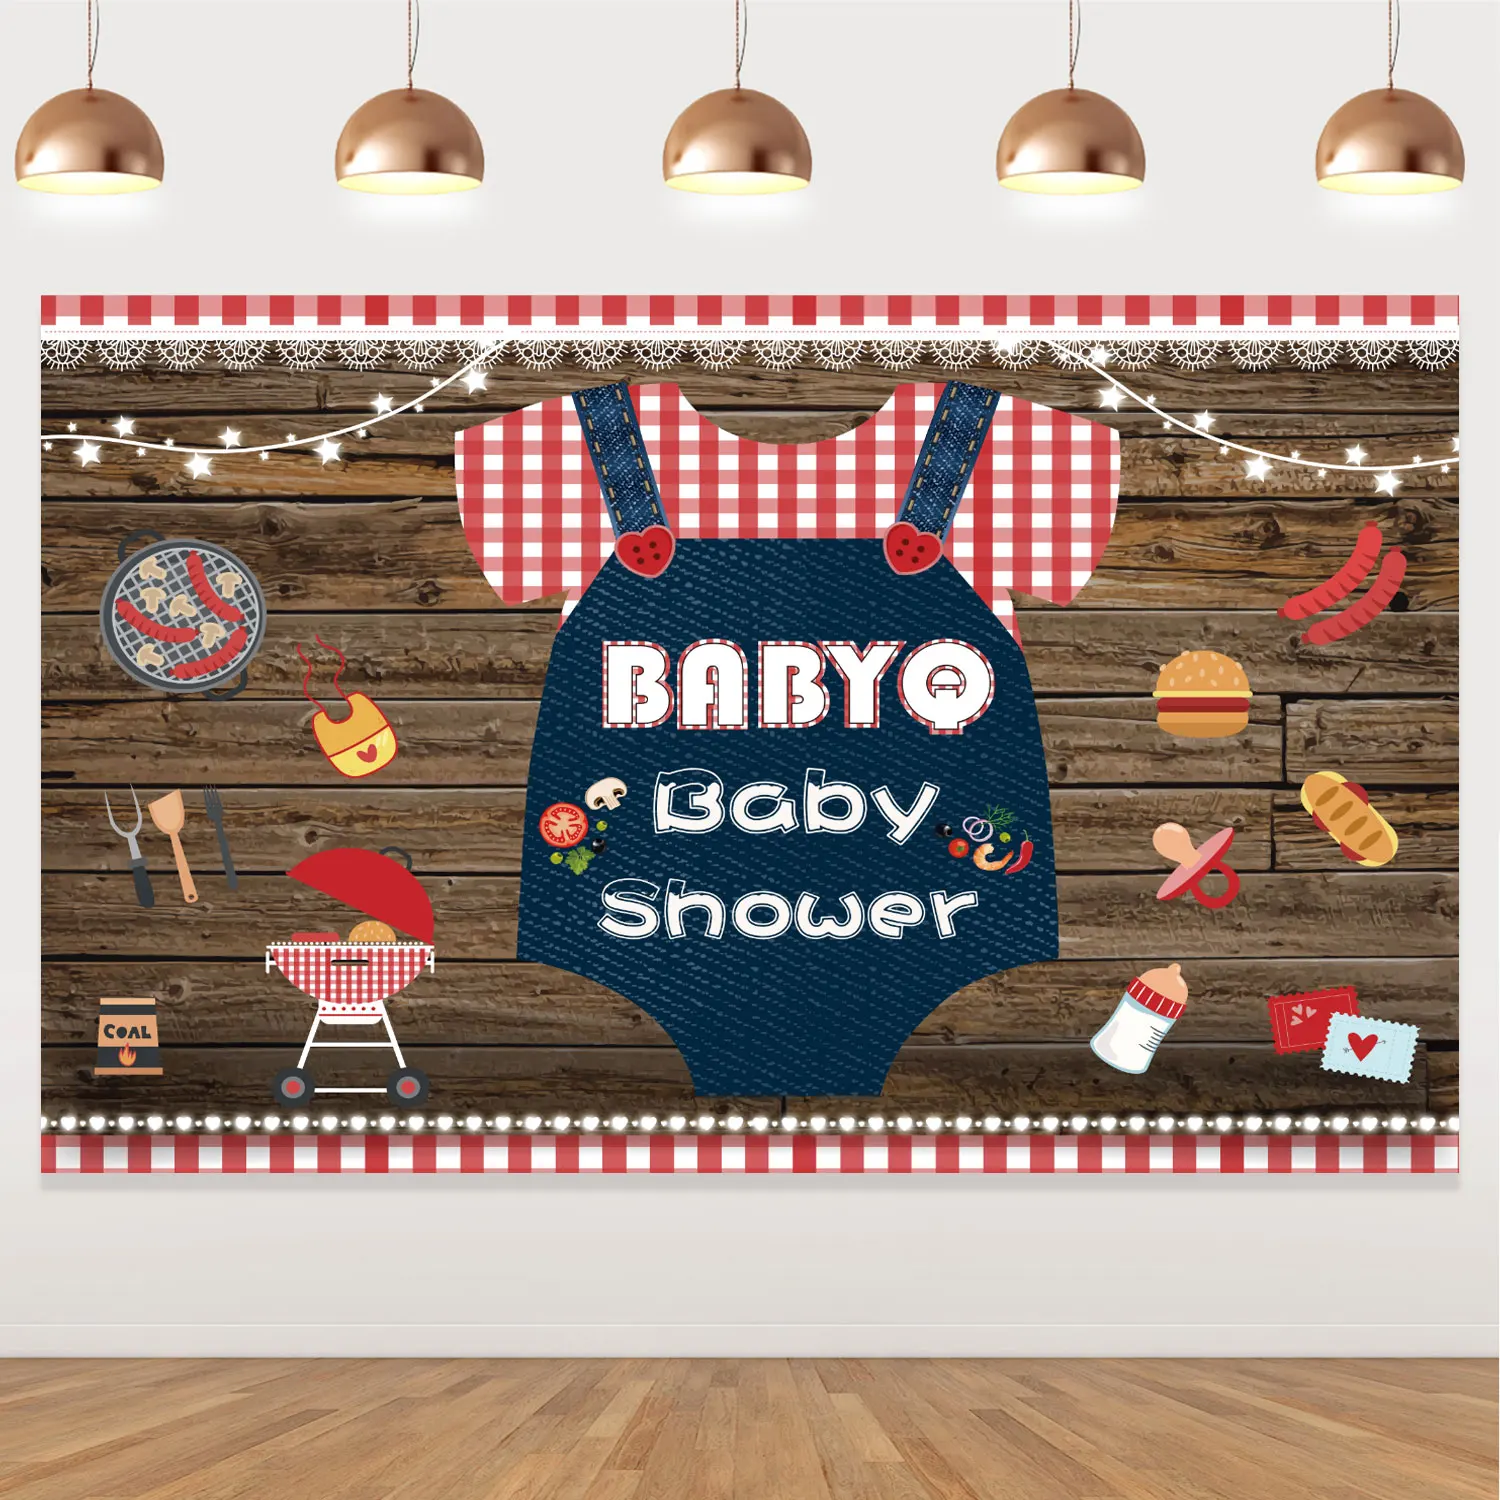 

BBQ Baby Shower Party Decoration Red Lattice Photography Background Barbecue Baby Shower Backdrop Banner Decor Booth Props